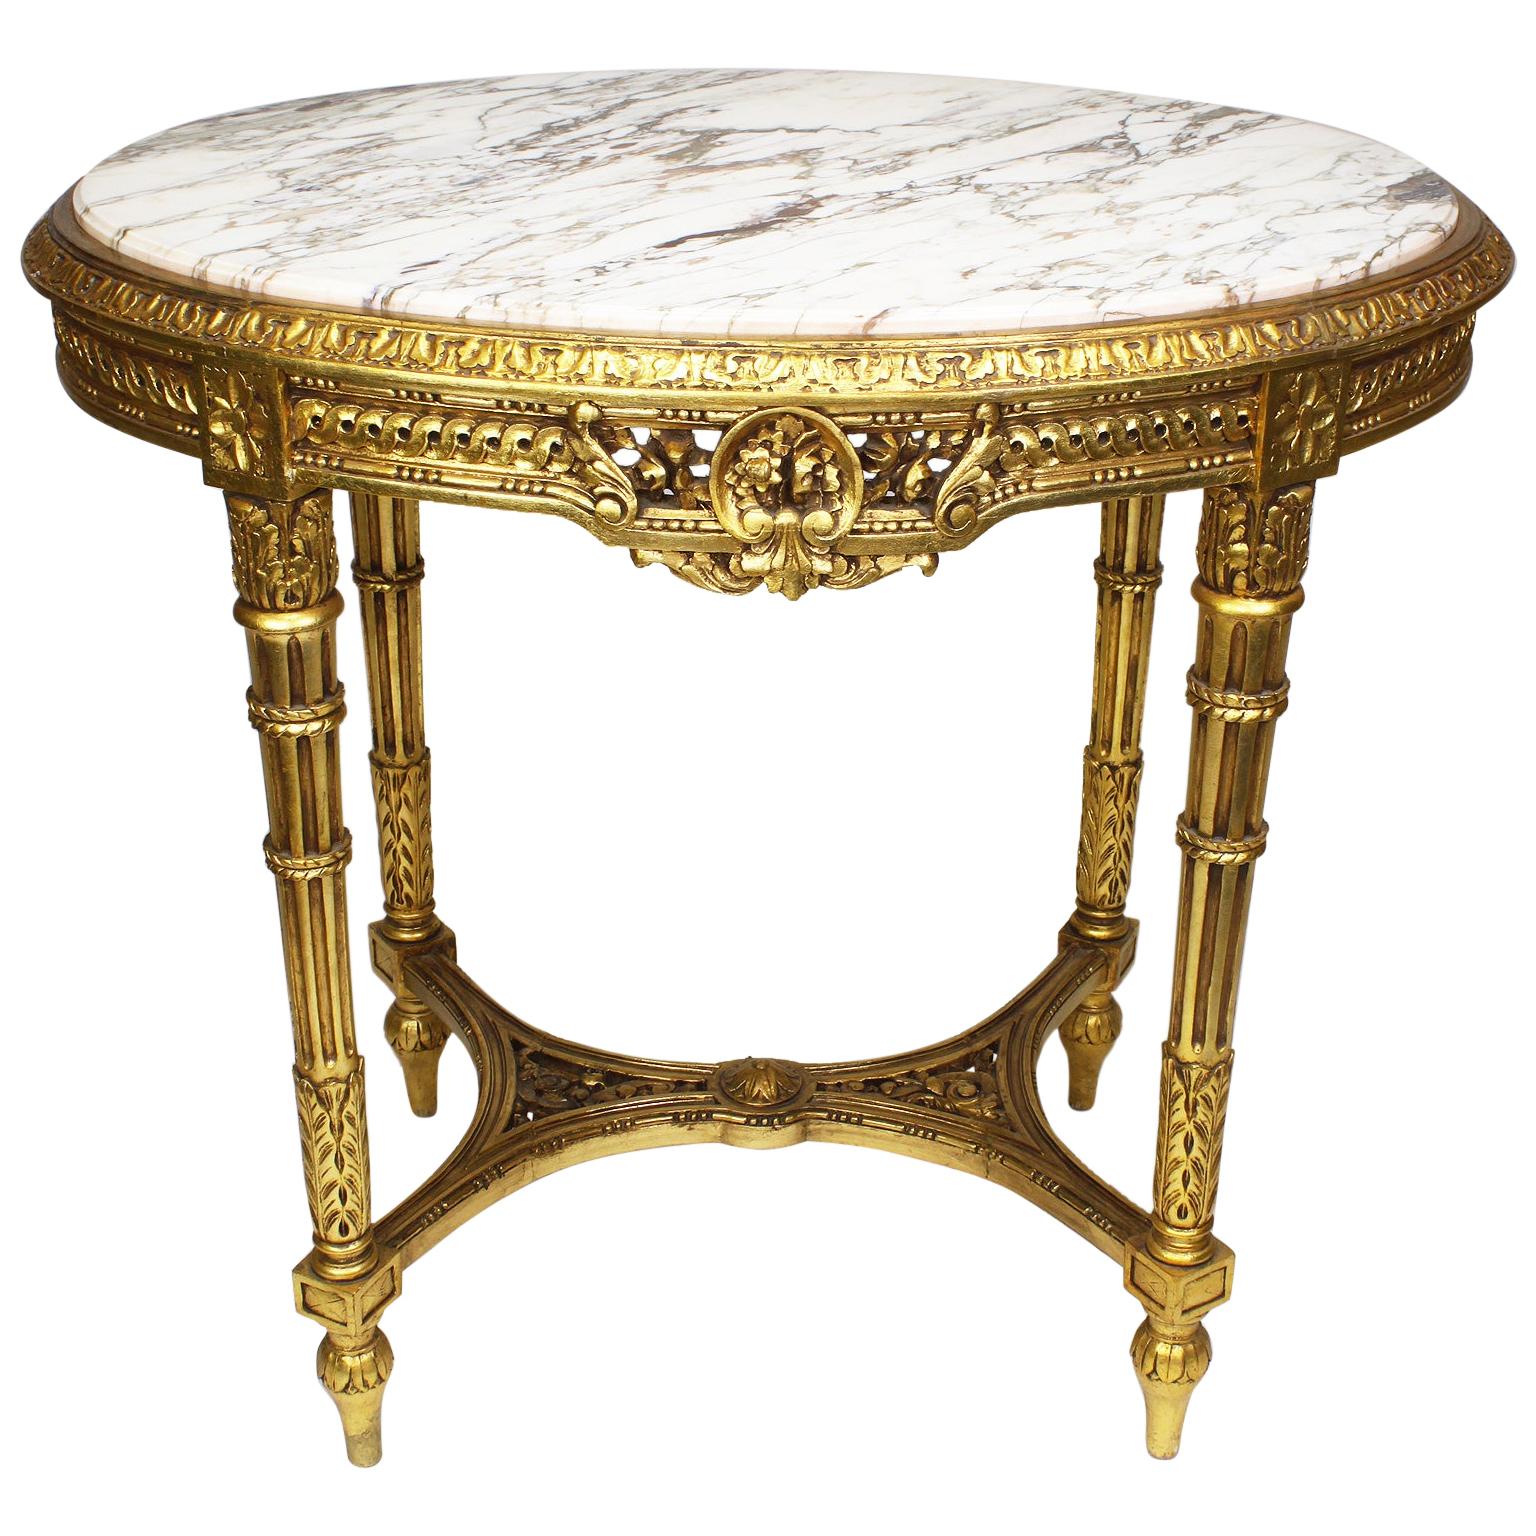 French Louis XVI Style Belle Époque Oval Giltwood Carved Marble-Top Center Table For Sale